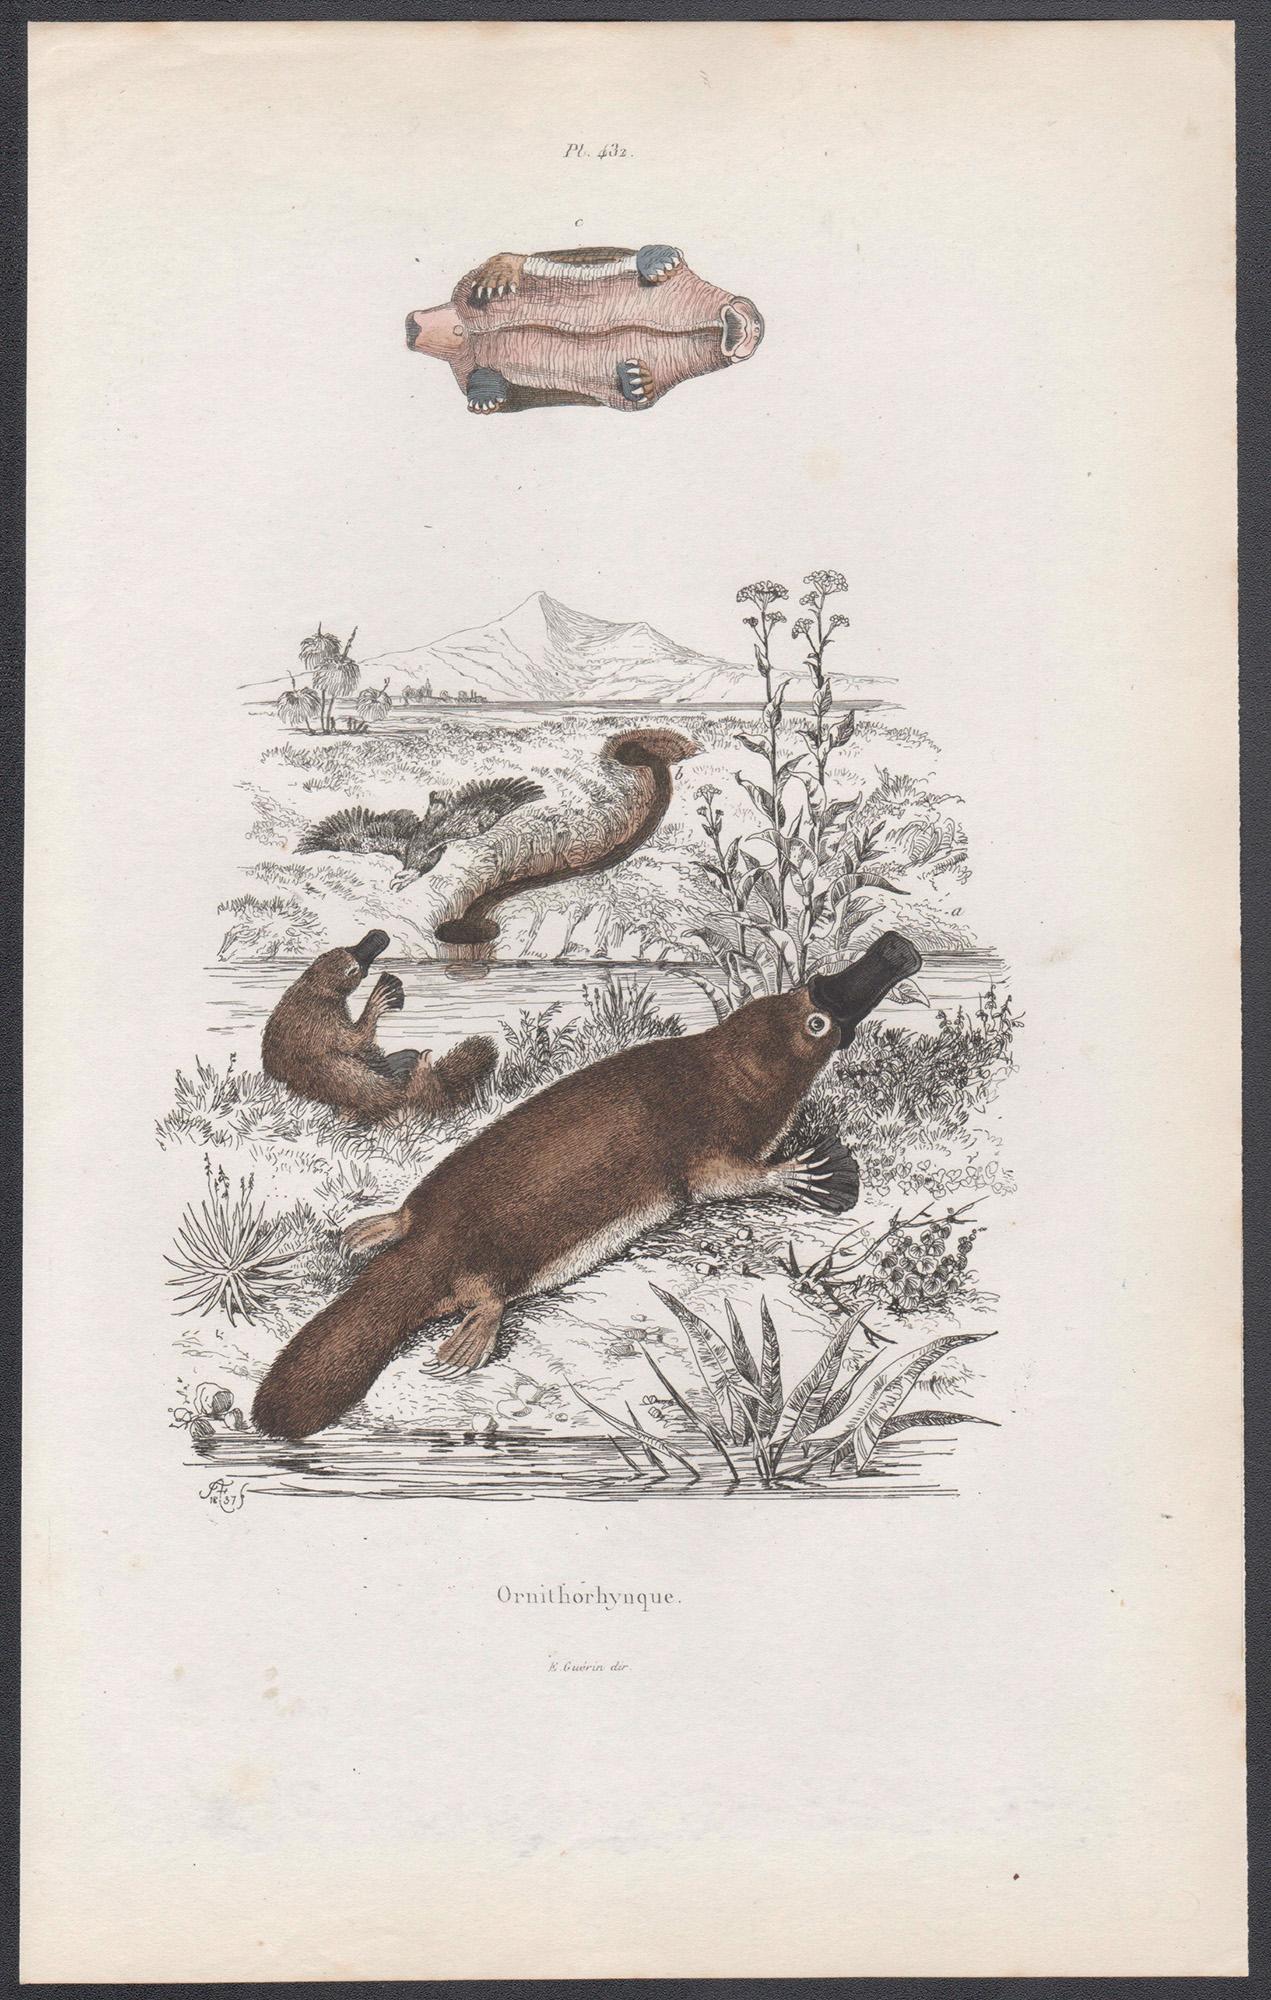 Ornithorhynque (Platypus), Australian animal monotreme engraving, 1837 - Print by Adolph Fries